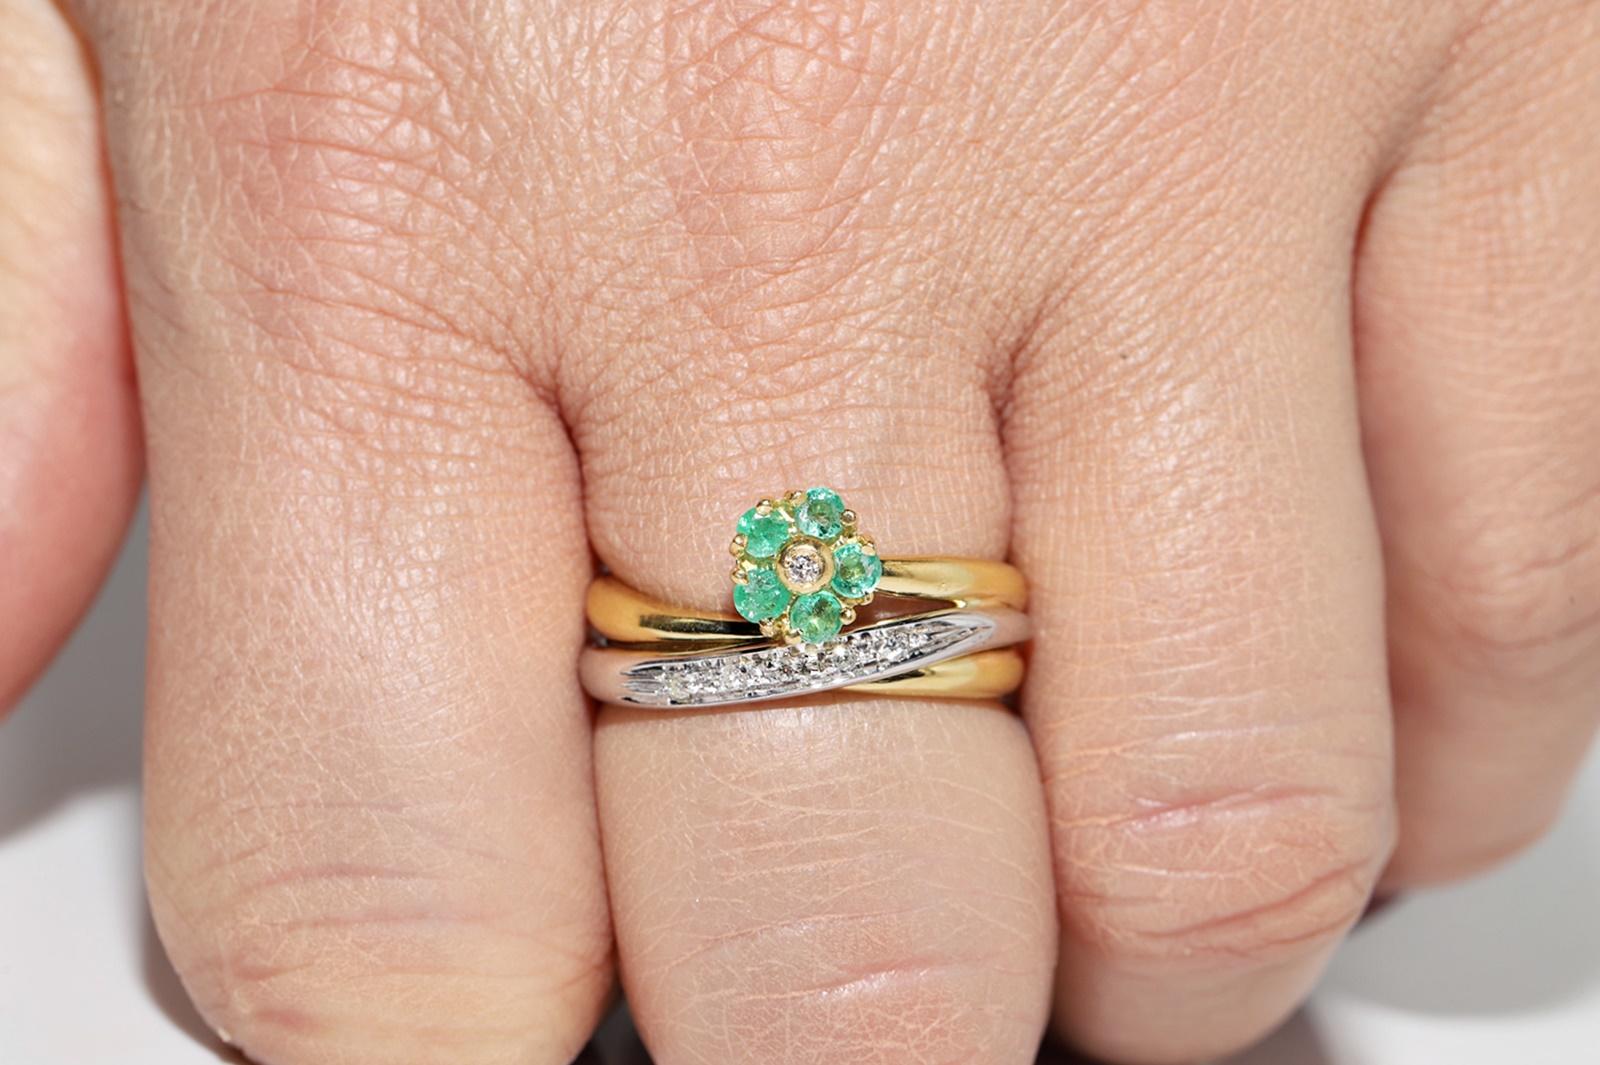 Brilliant Cut Vintage Circa 1980s 18k Gold Natural Diamond And Emerald Decorated Ring For Sale